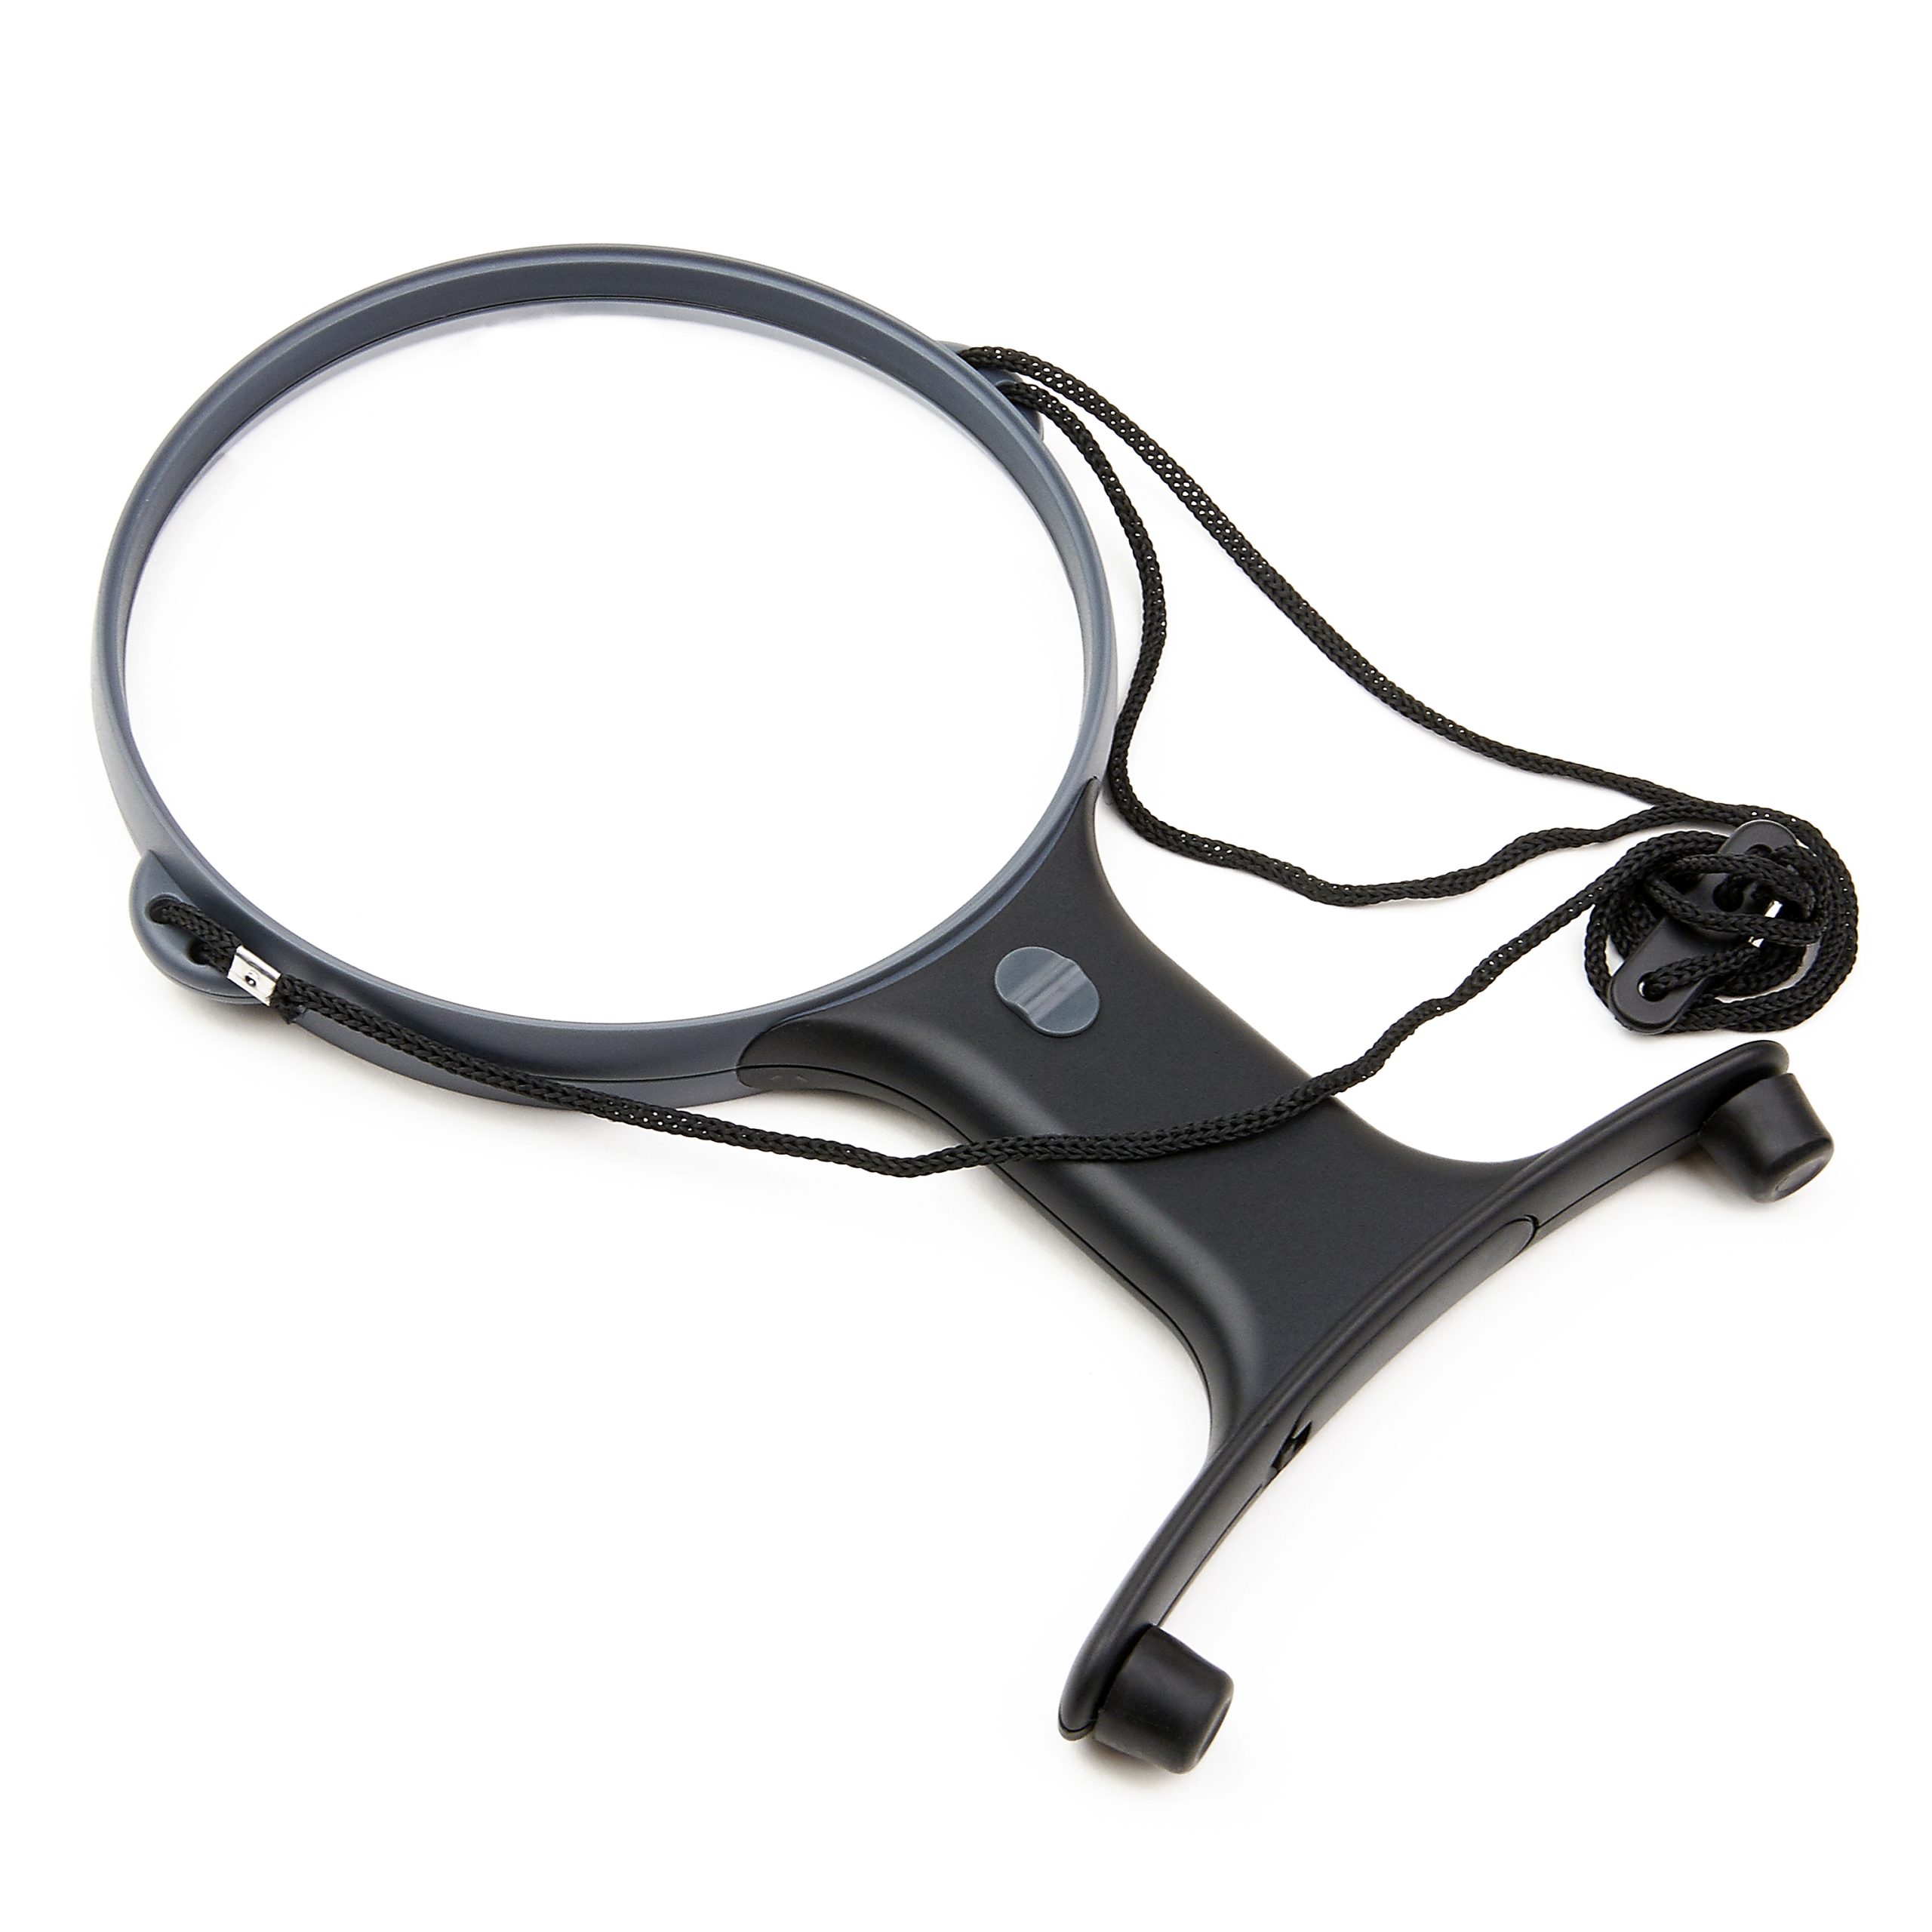 MagniShine™ Dual LED Lit 2x Magnification Hands-Free Magnifying Glass